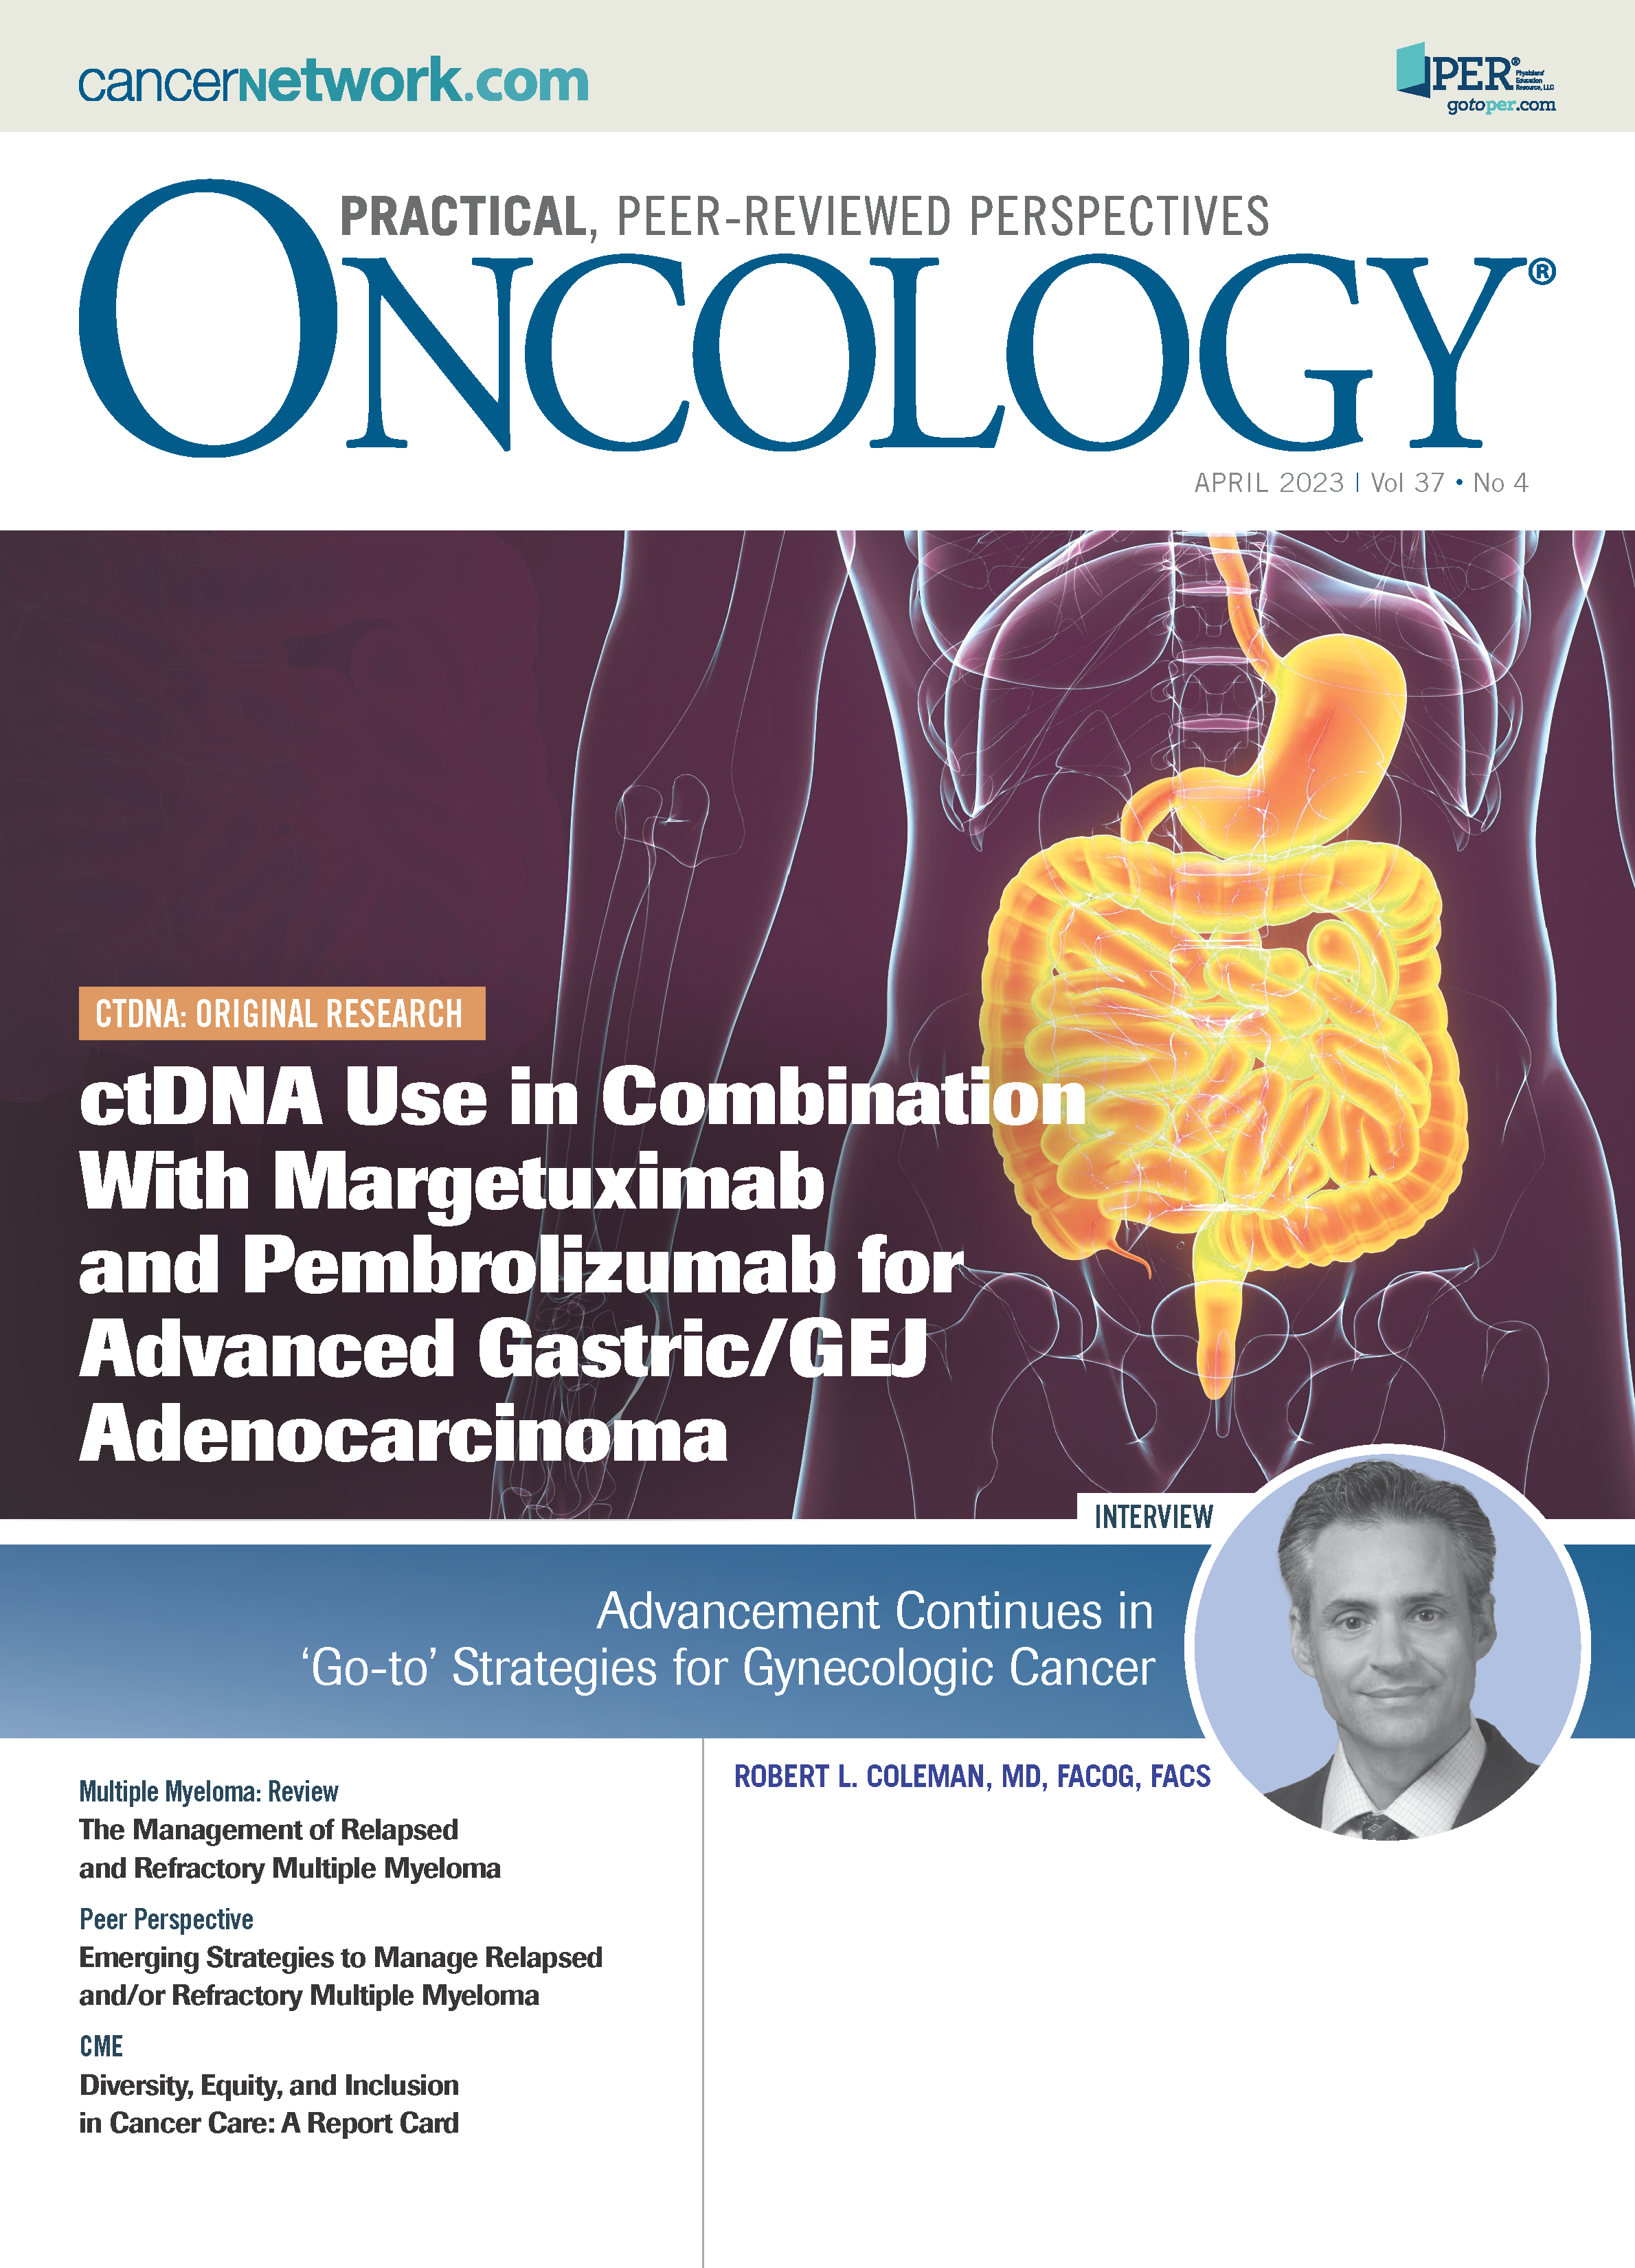 ONCOLOGY Vol 37, Issue 4